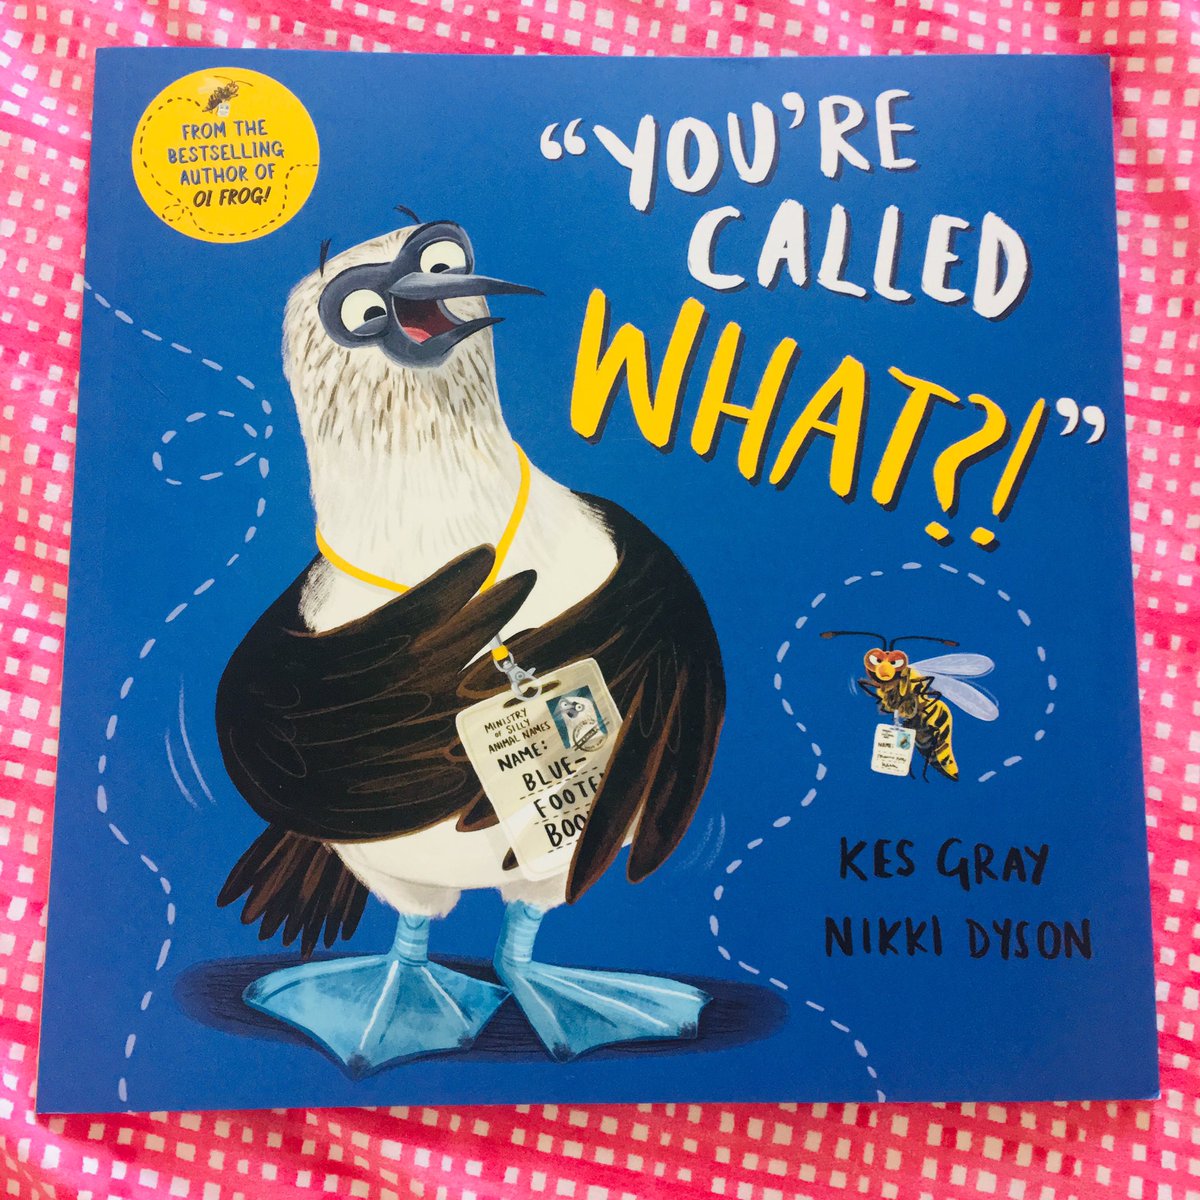 I’m so happy and excited to finally announce that ‘You're called what?!' written by the brilliant #KesGray and illustrated by me has only won the #HantsSLSHPBA2019 picture book award!! 🎉🎉It was voted for by 5871 pupils accross Hampshire! Hooray!💛@HantsSLS #picturebookaward2019